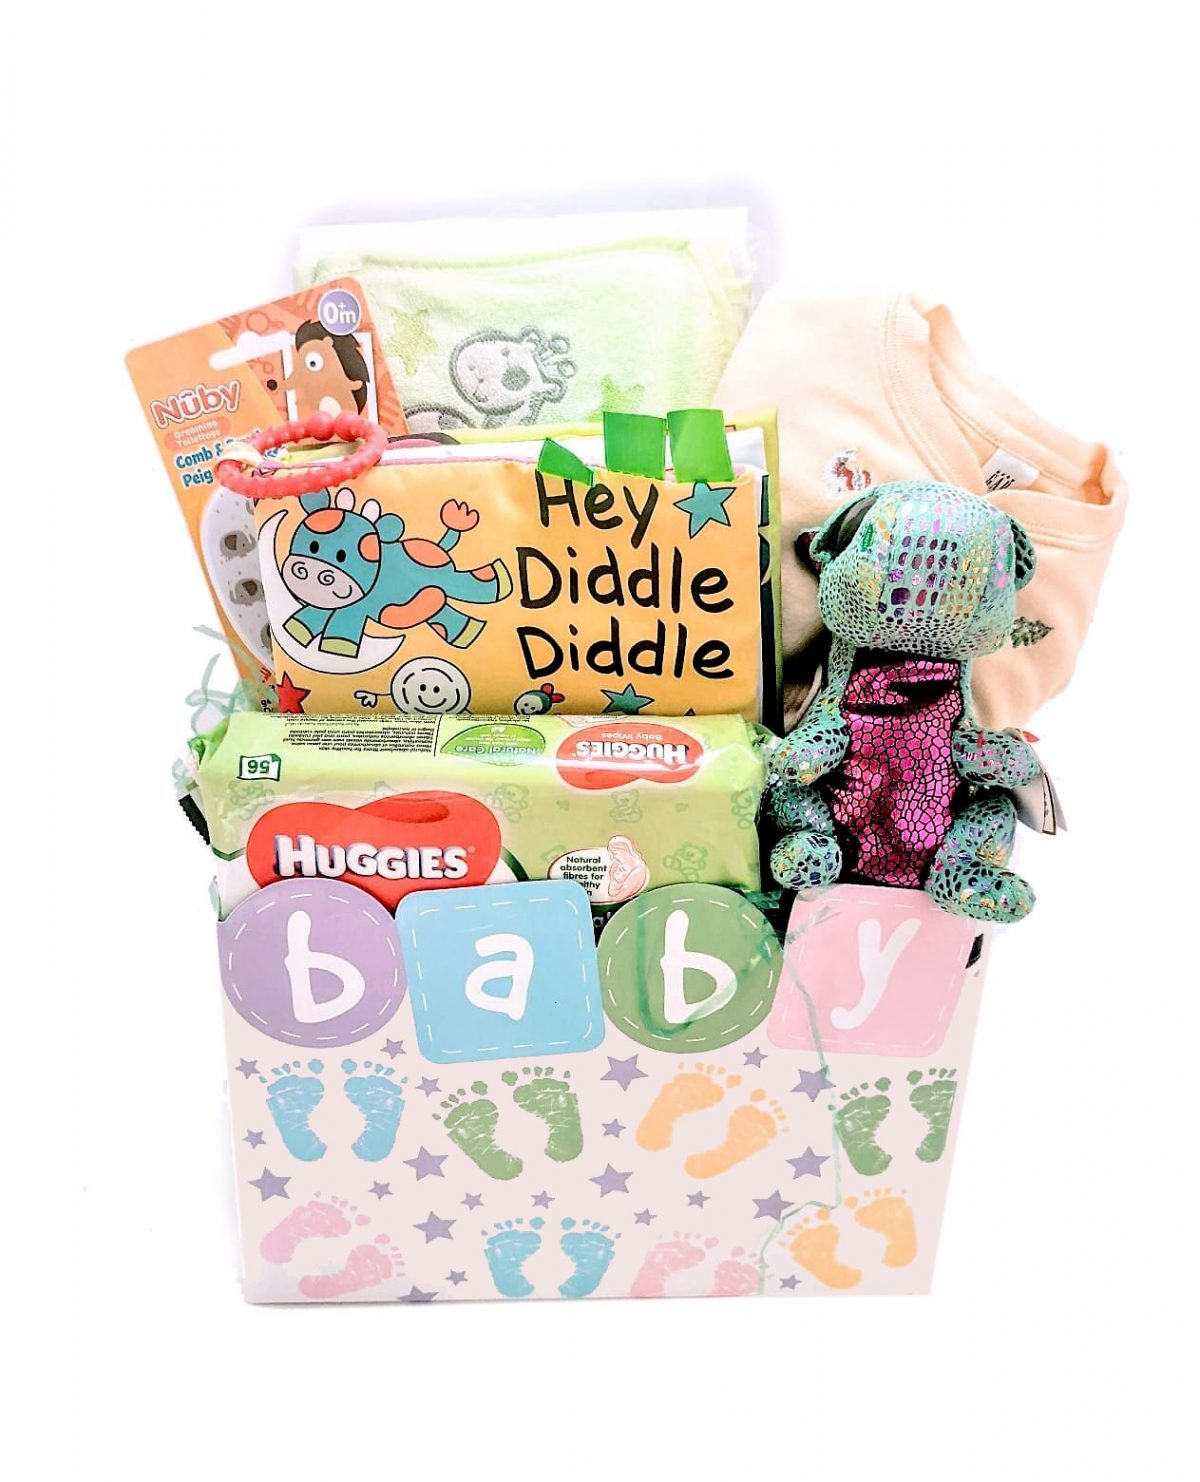 Baby gifts for girls and boys for all celebrations and gift baskets